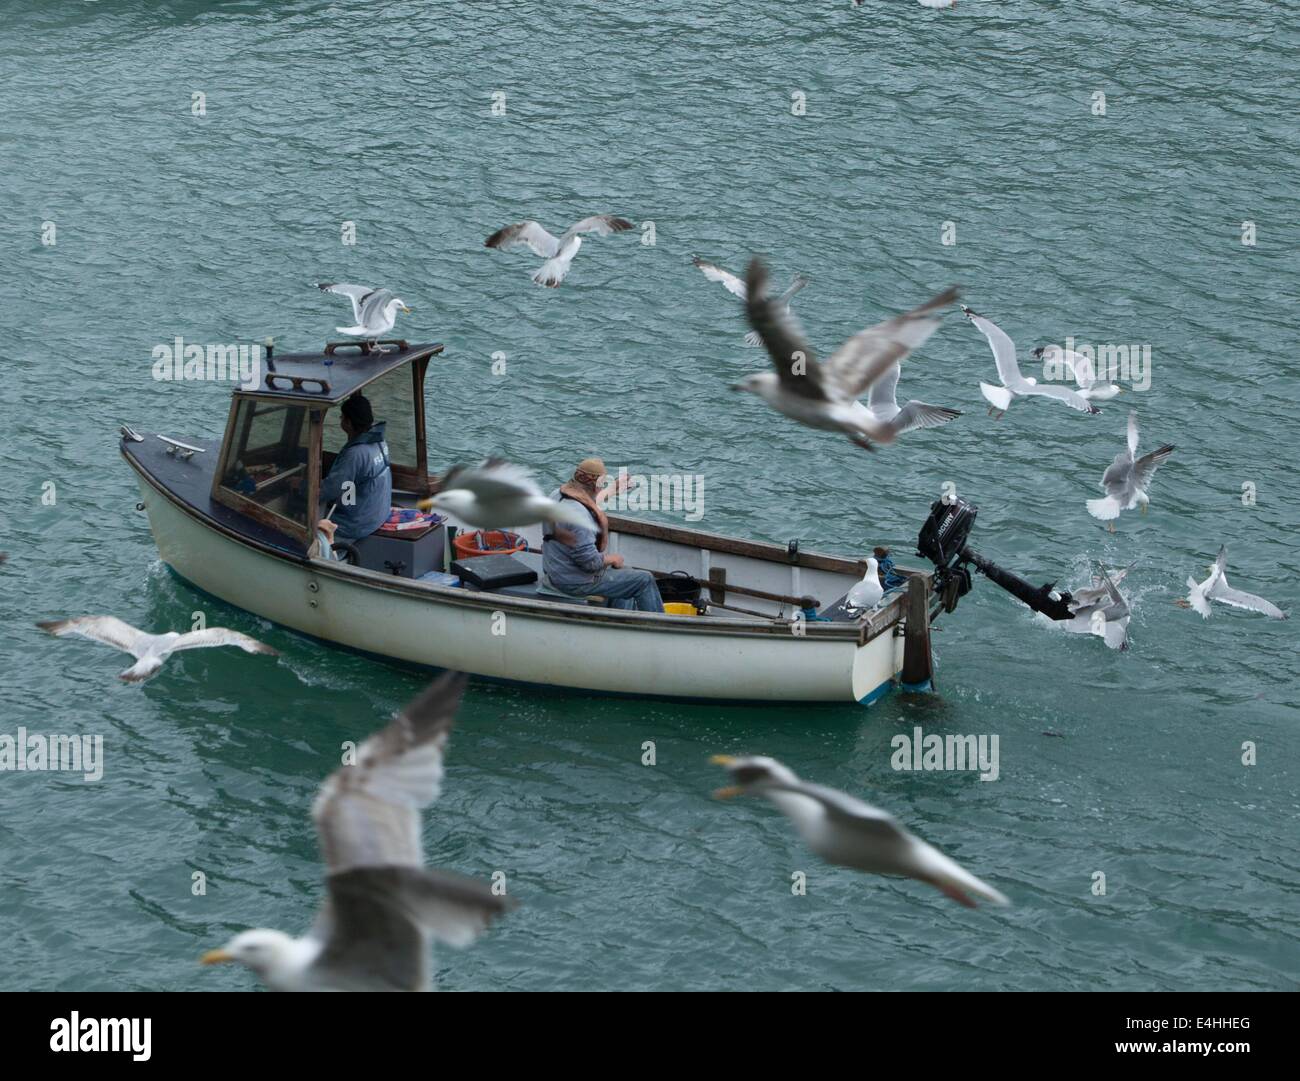 A fishing boat coming into the harbour at Looe Cornwall with a mob of seagulls Stock Photo